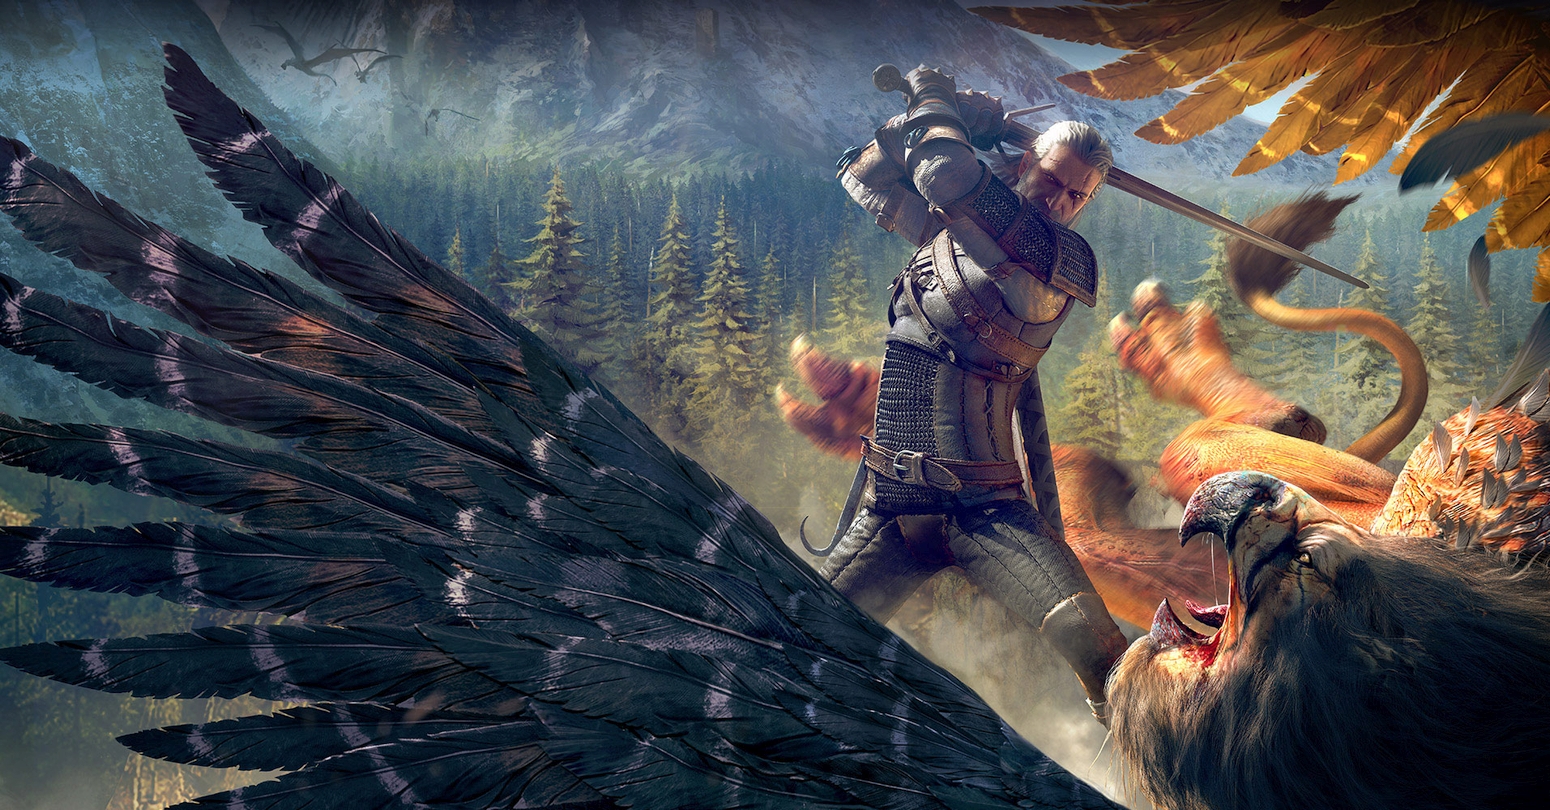 The Witcher 3: Wild Hunt Sales Skyrocket Following Netflix Show And Nintendo Switch Release